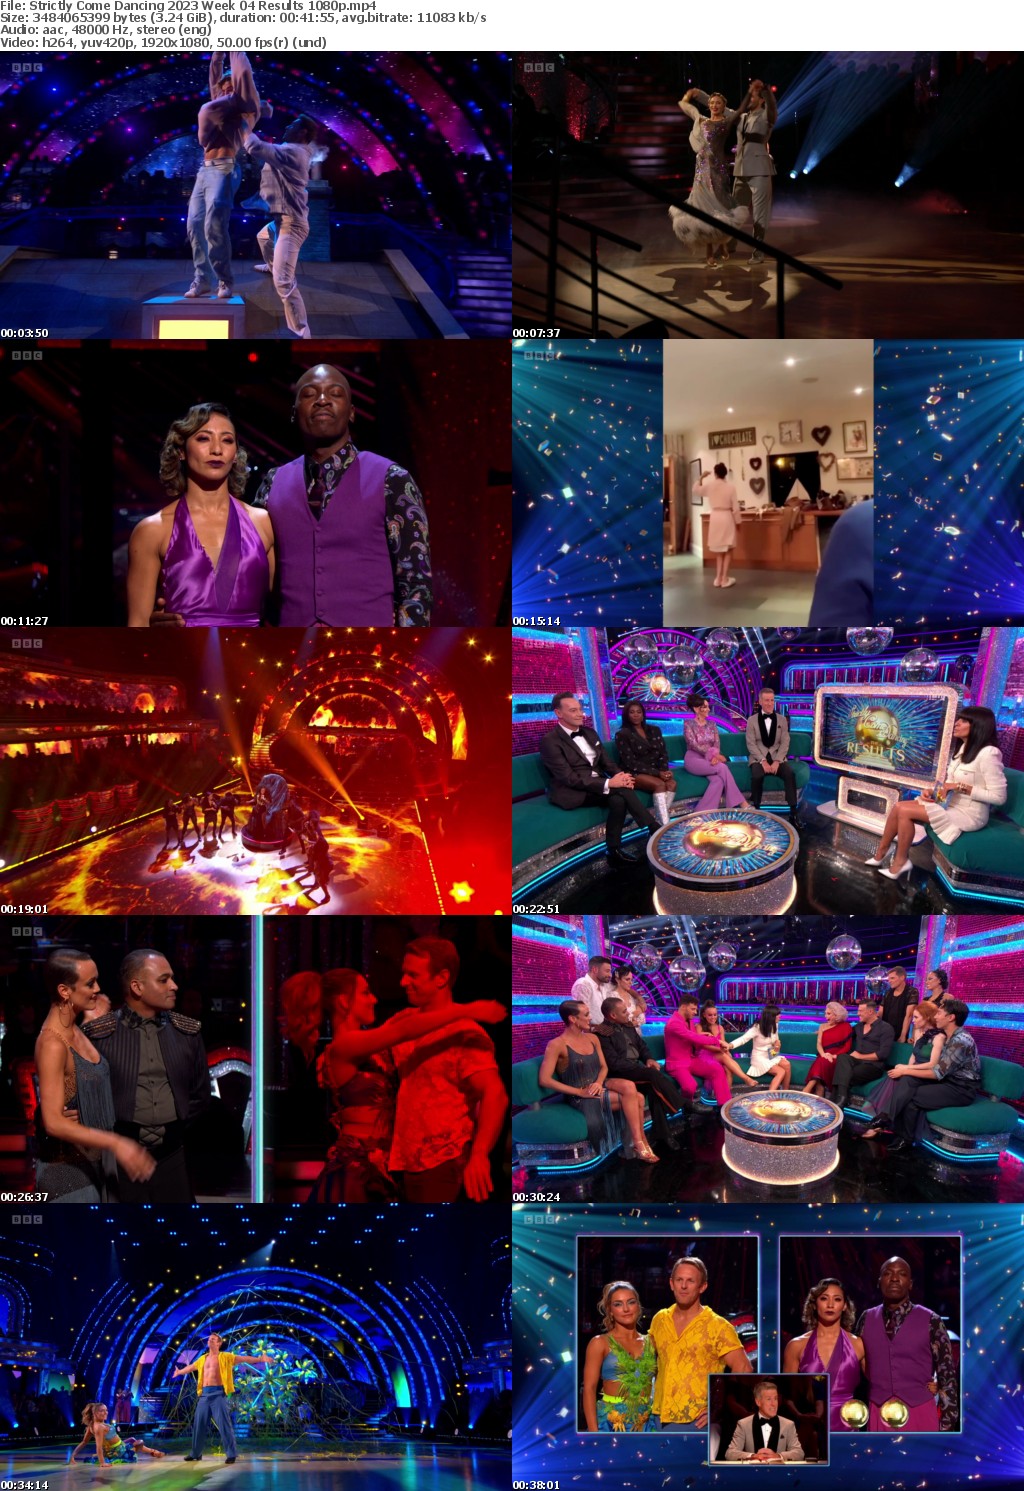 Strictly Come Dancing 2023 Week 04 Results (1080p, 50fps, soft Eng subs)